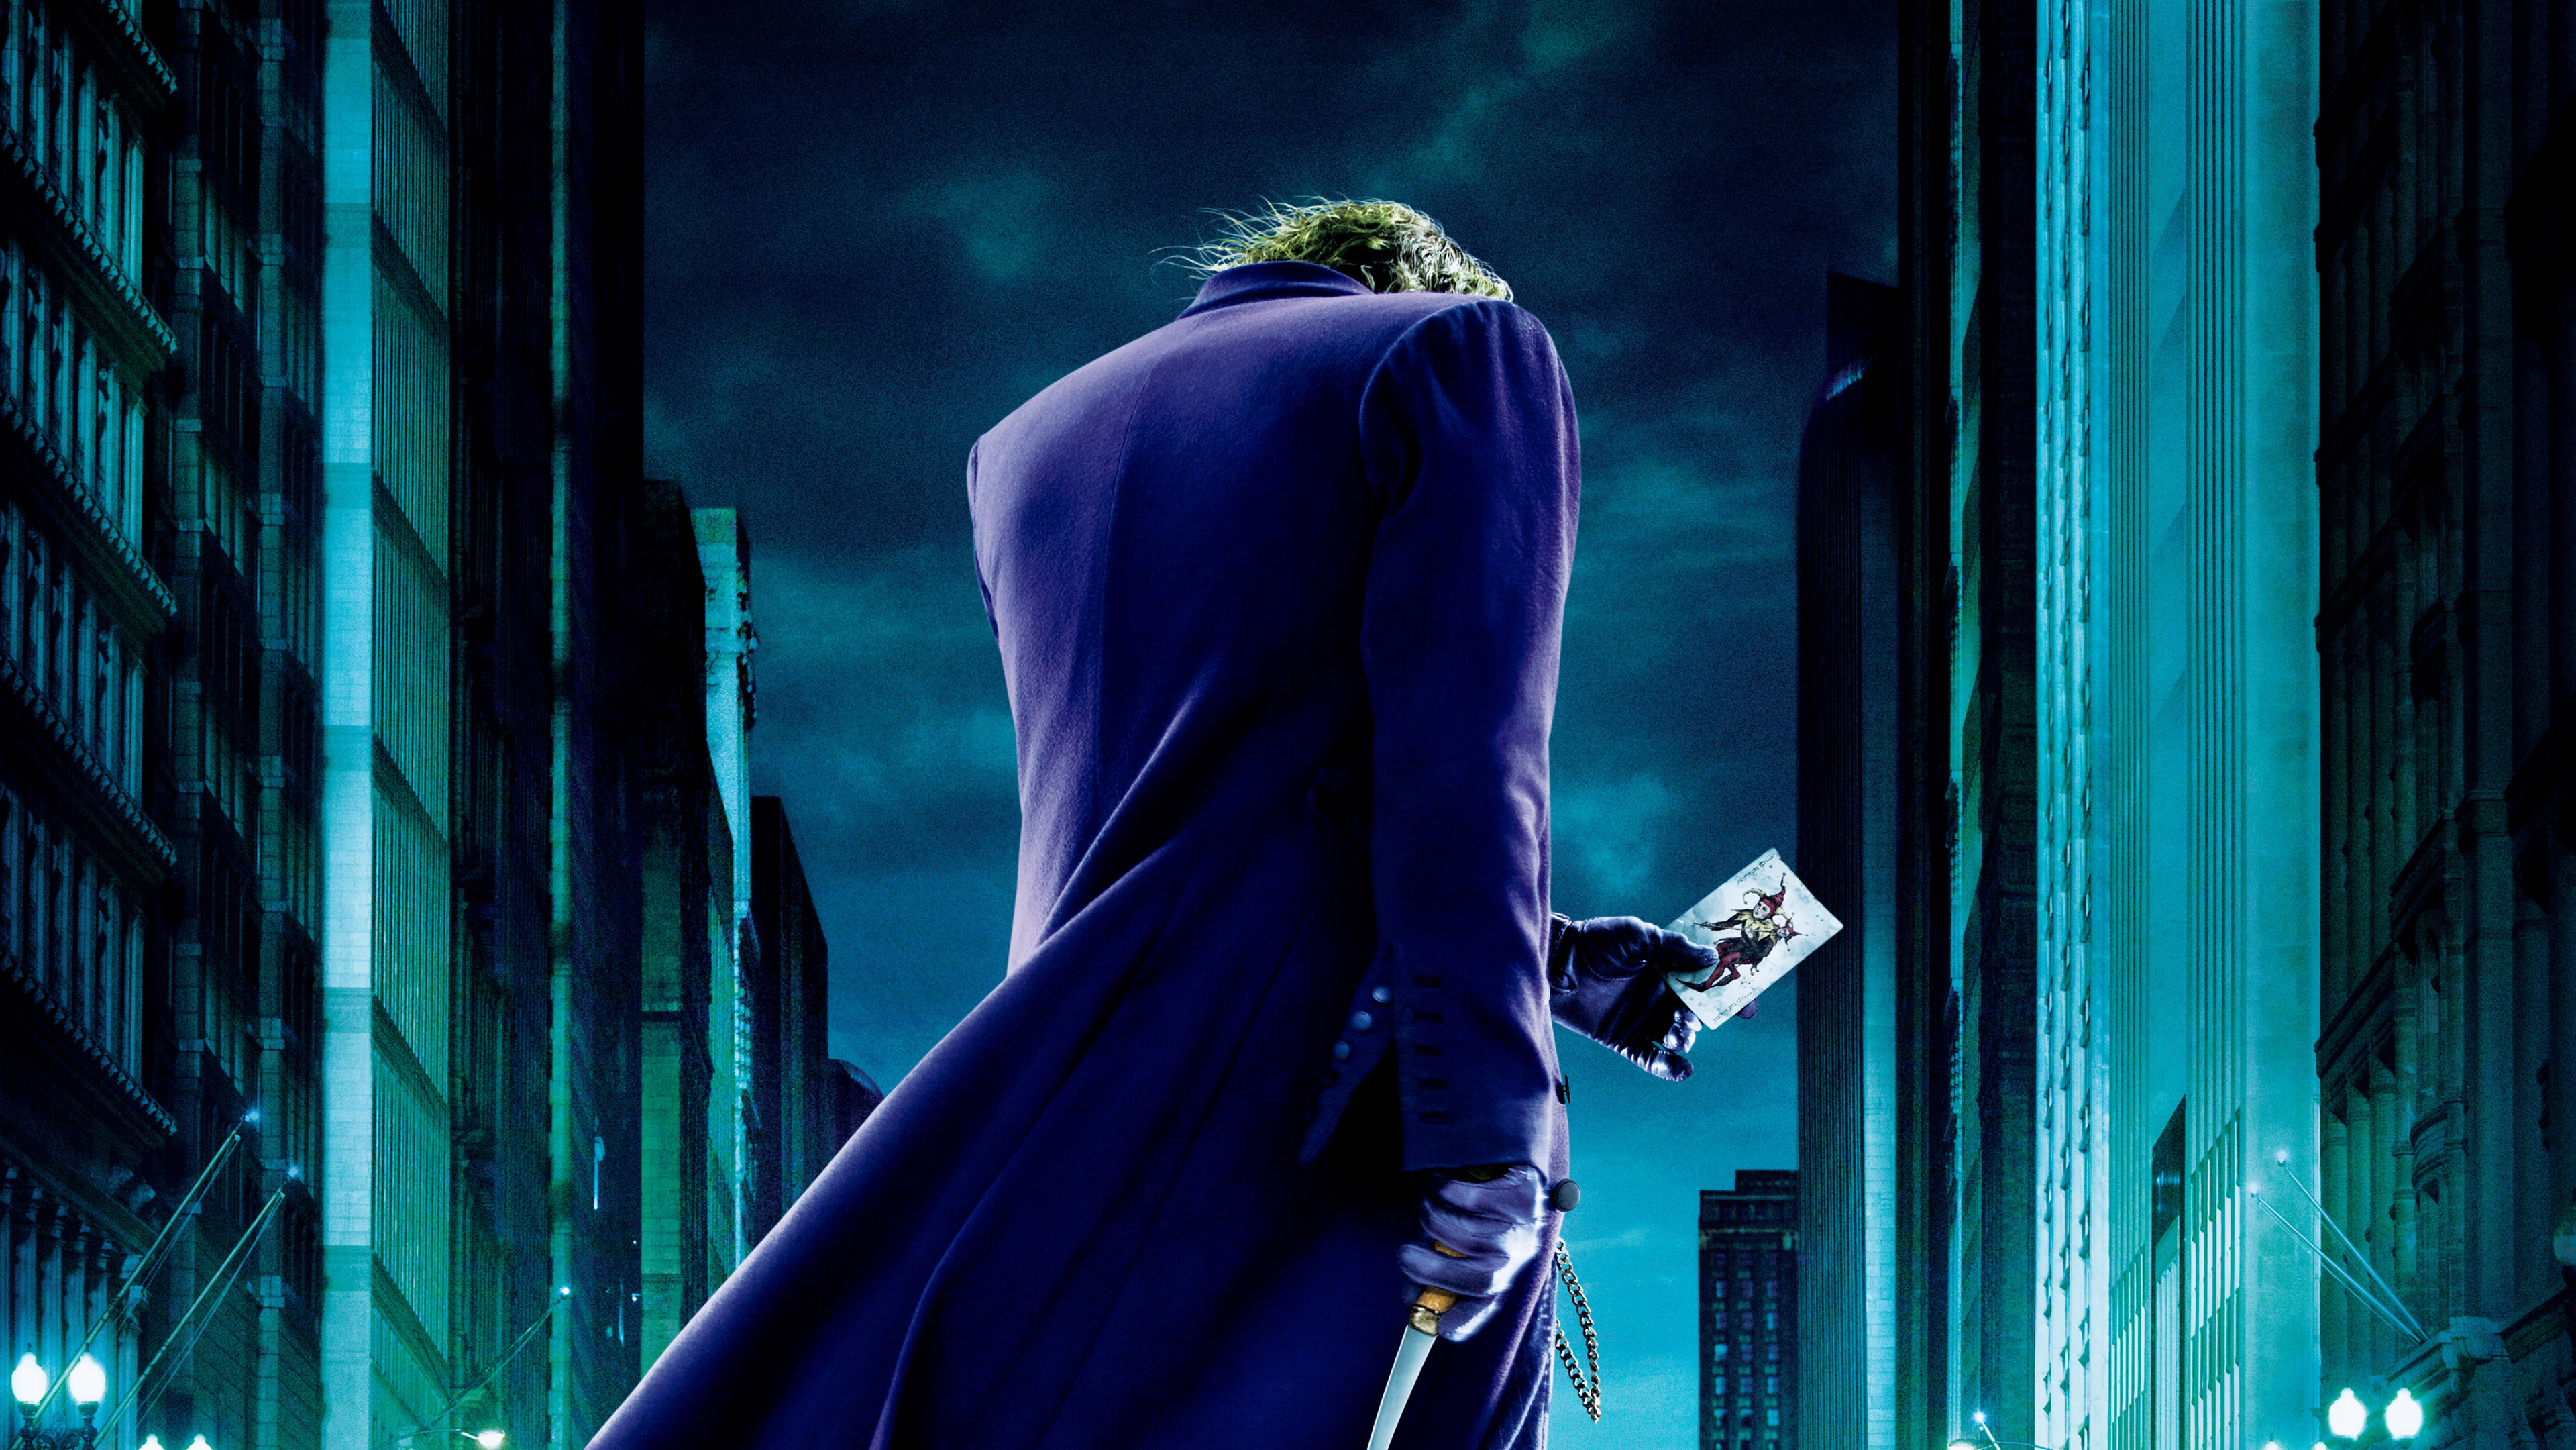 Joker The Dark Knight 4K, Hd Movies, 4K Wallpapers, Images, Backgrounds